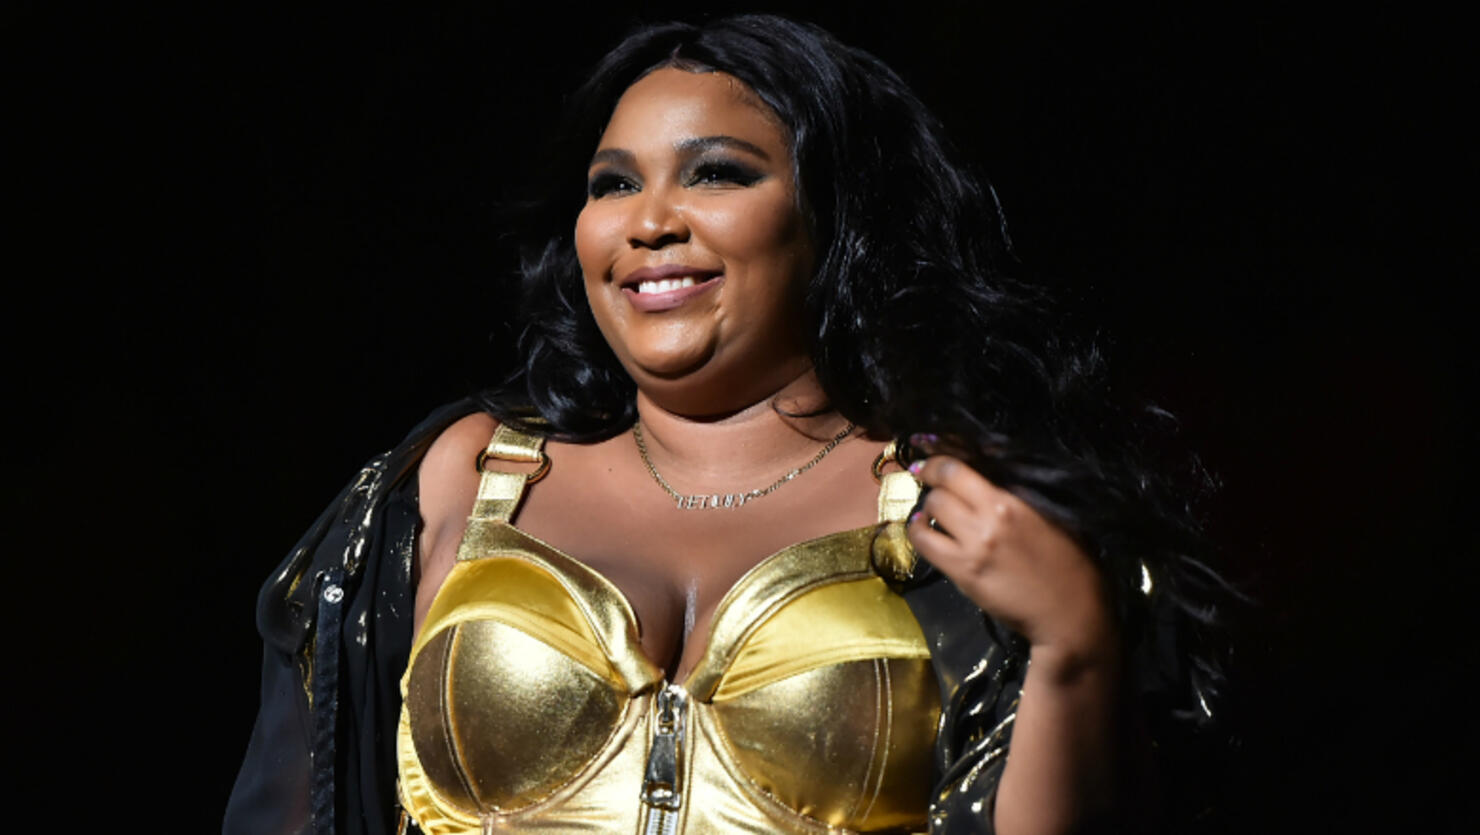 Here Are The Songs Lizzo Plays To Feel Like ‘100 That Btch Iheart